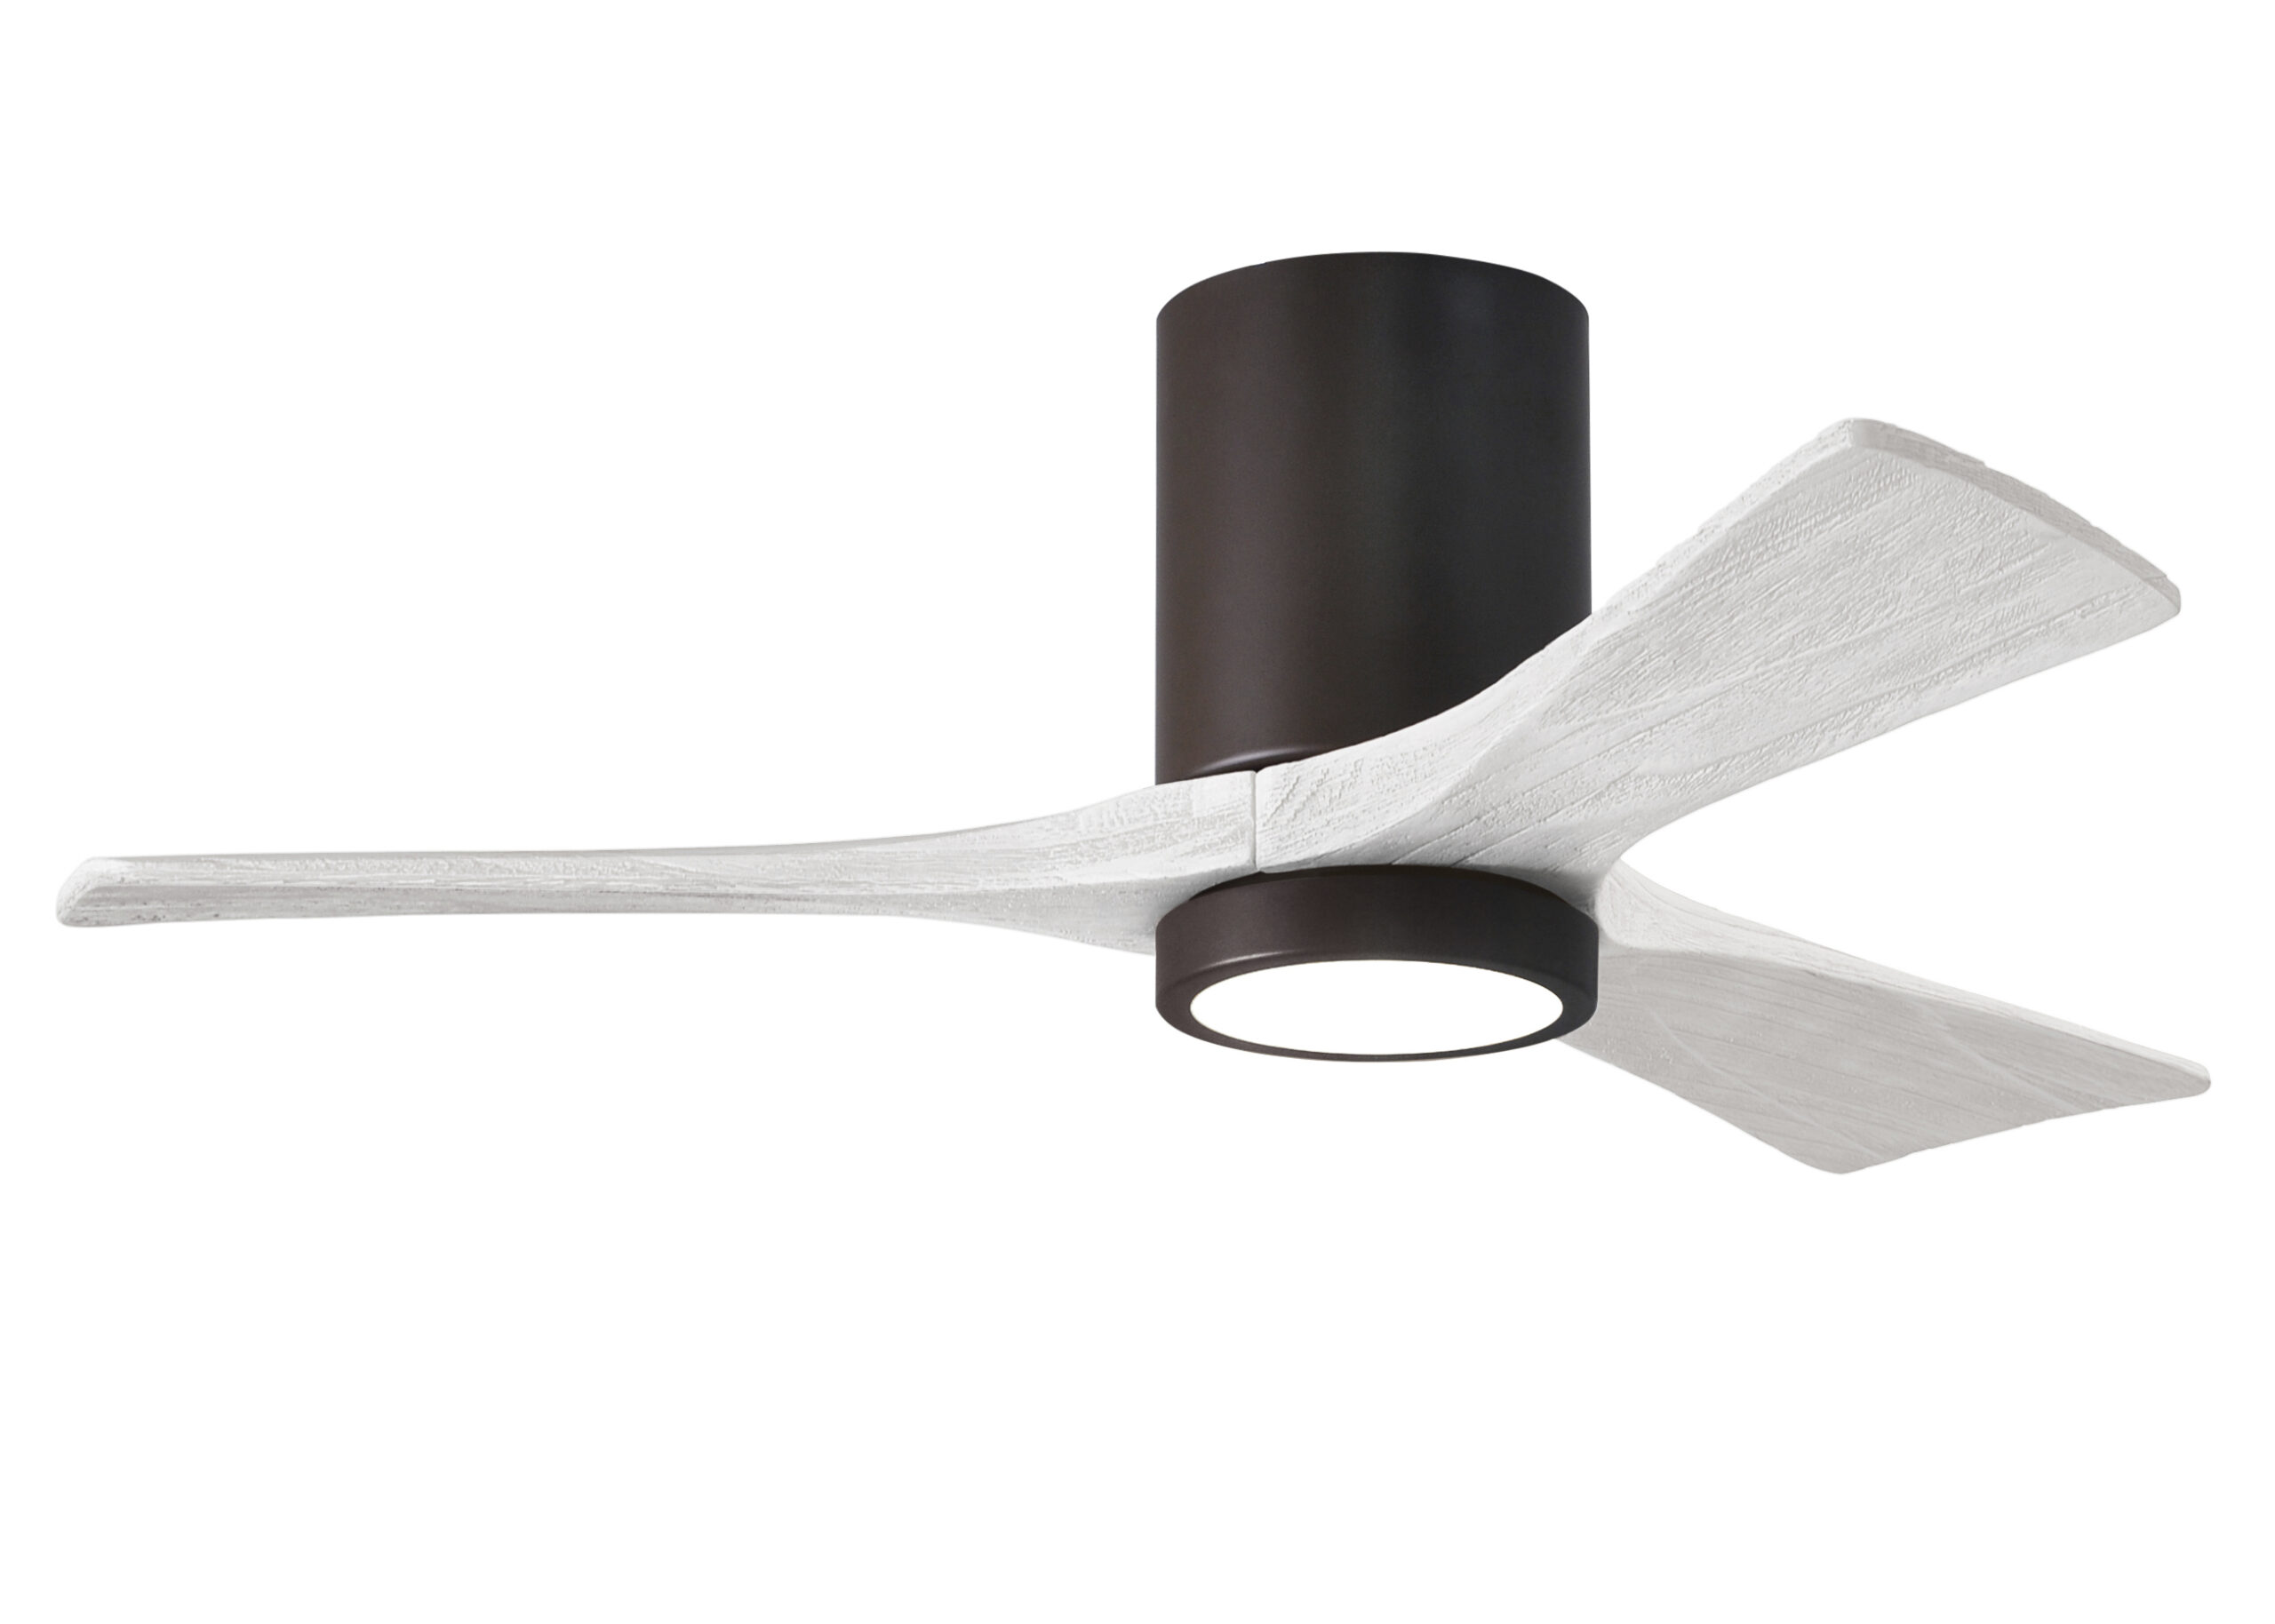 Irene-3HLK Ceiling Fan in Textured Bronze Finish with 42